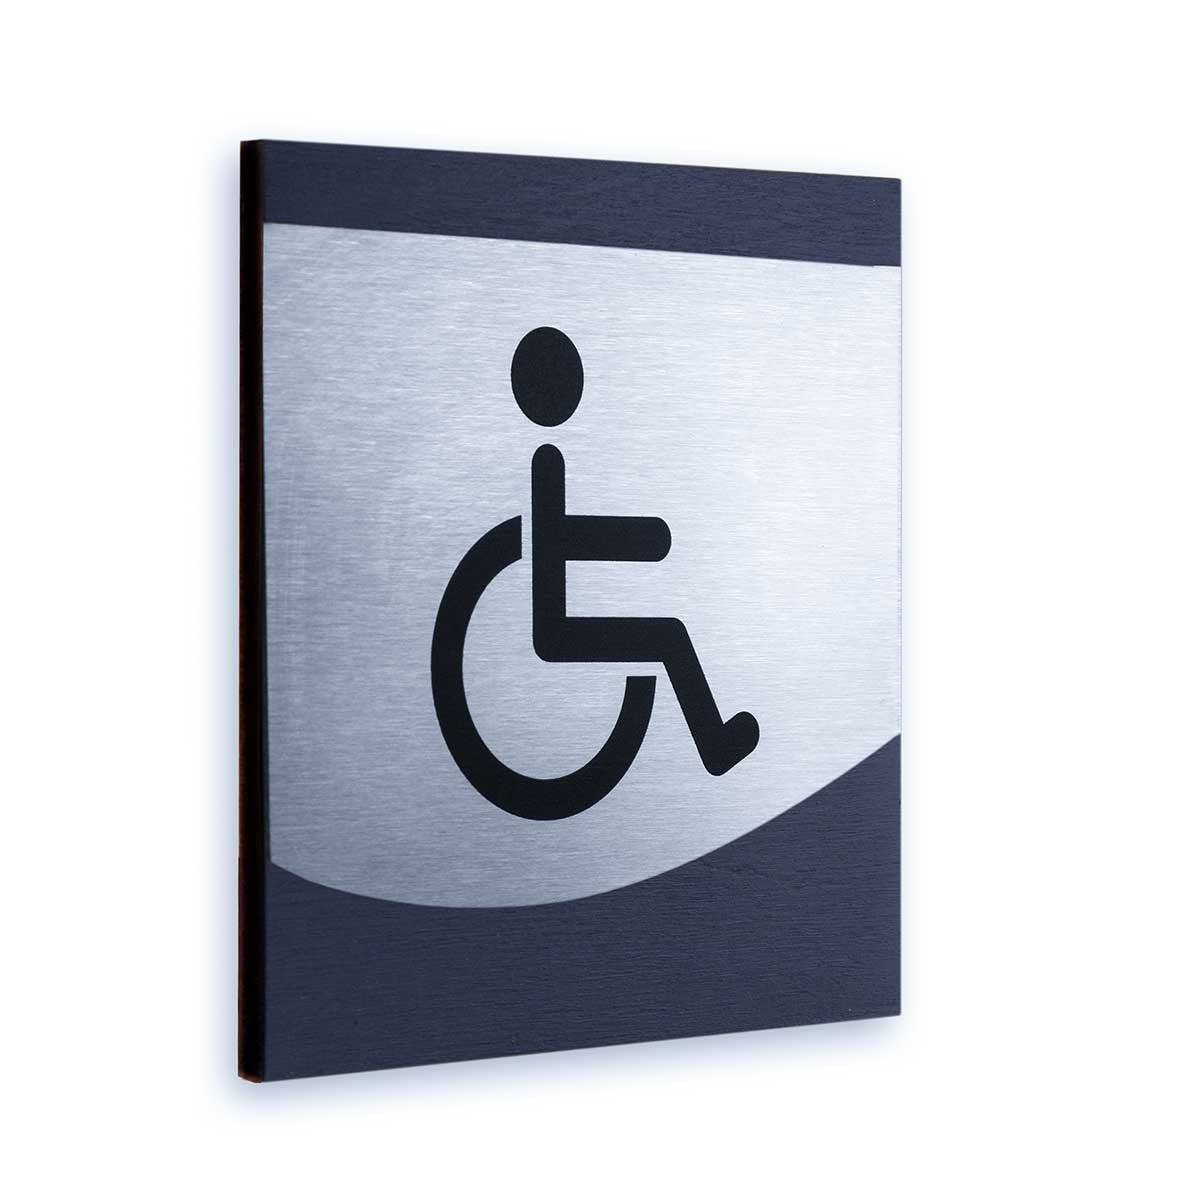 Steel Wheelchair Accessible Restroom Sign Bathroom Signs Anthracite Gray Bsign